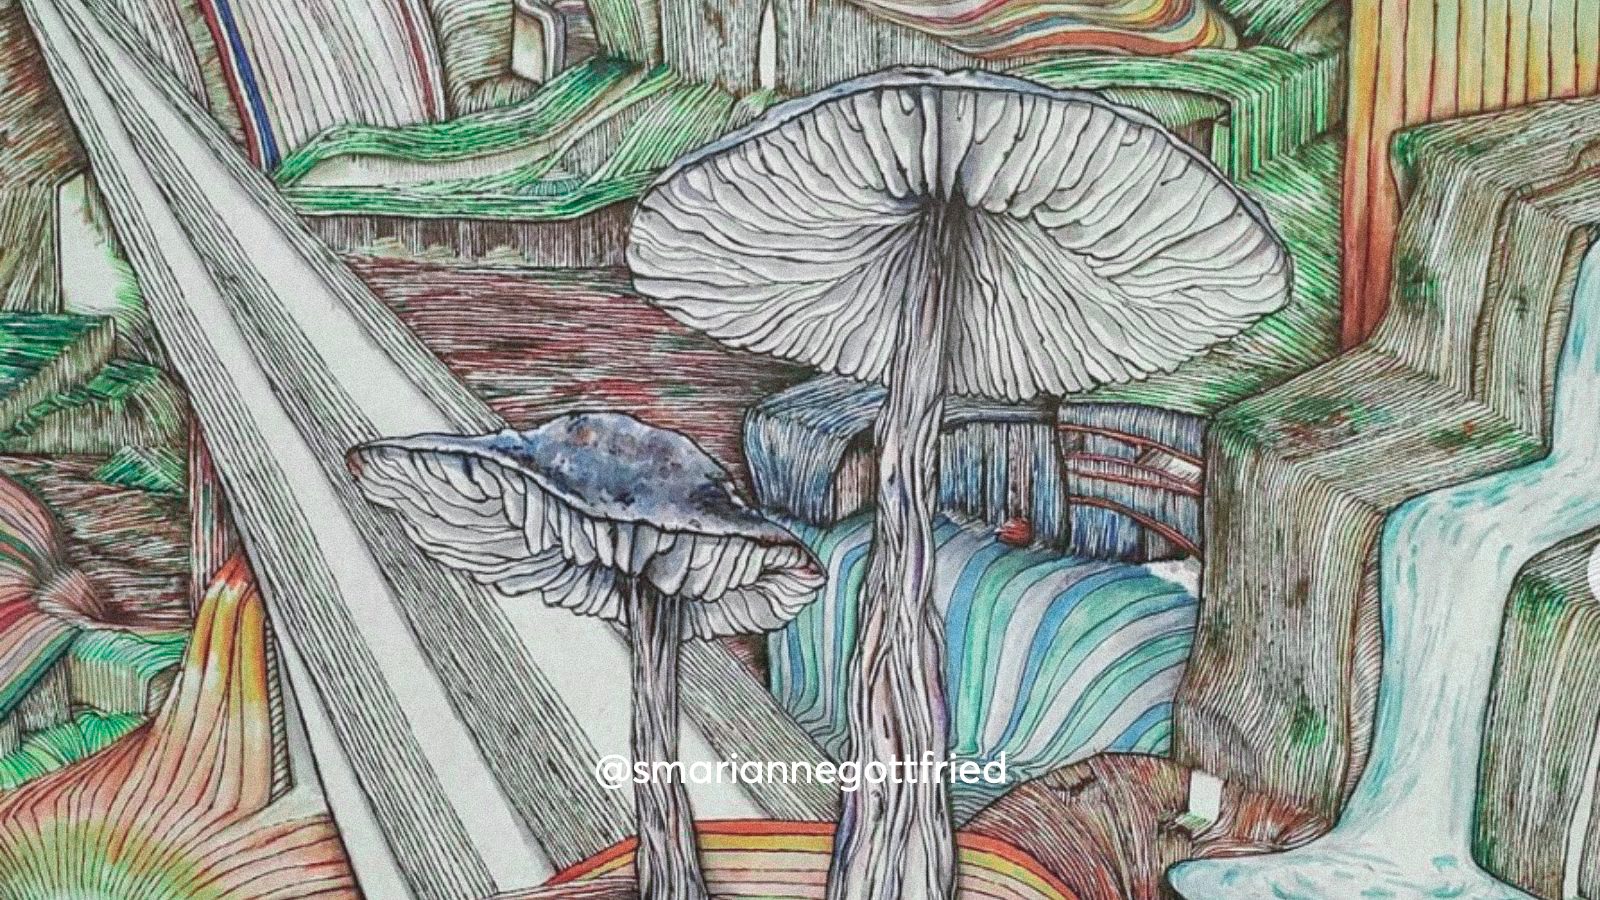 An illustration of a magic mushroom showing the glands and spores near a waterfall.